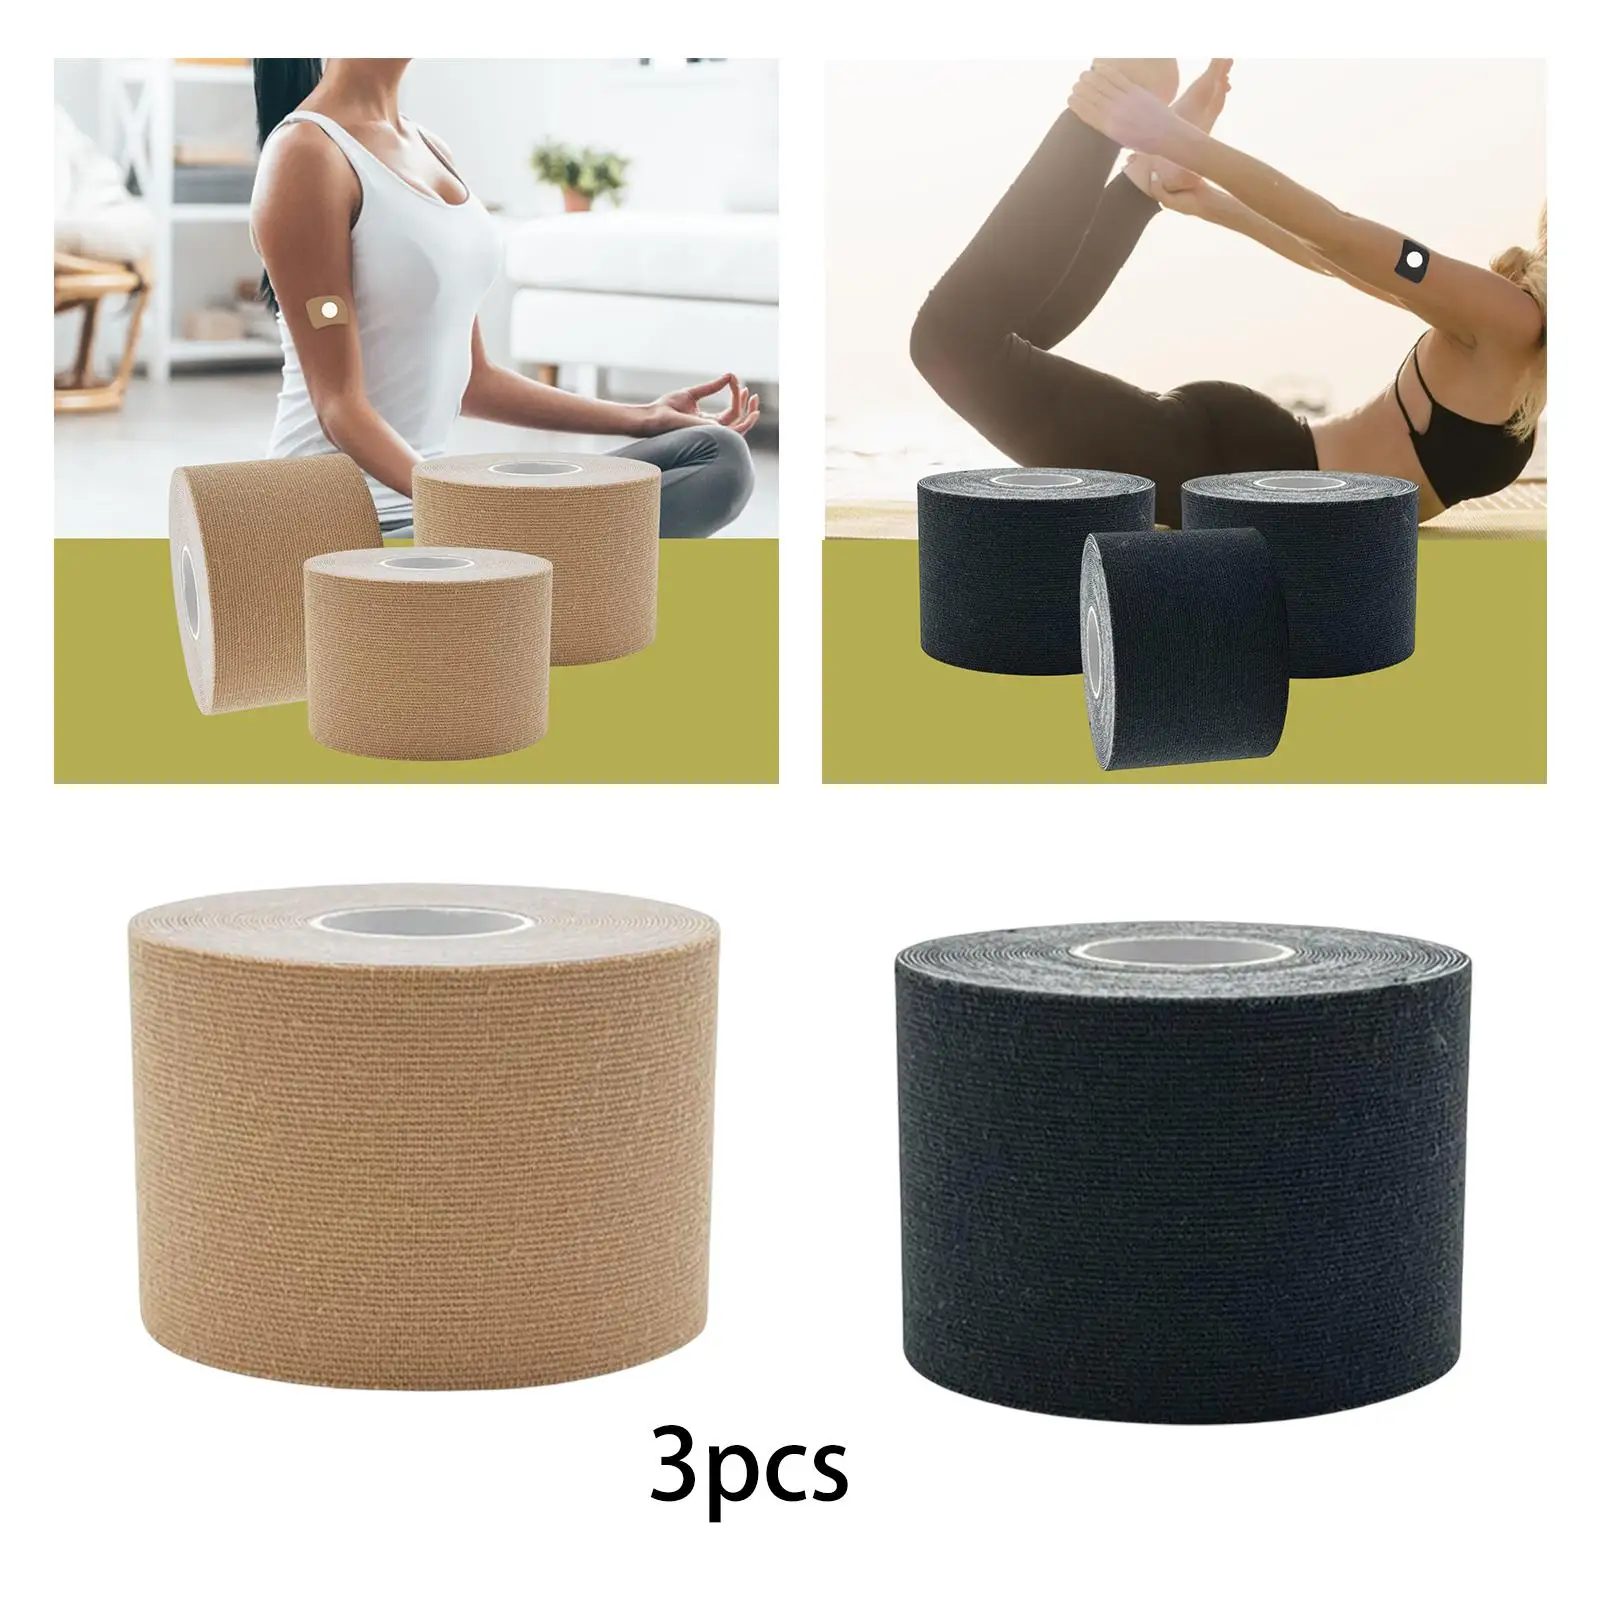 3Pcs 3Cmx5M Tape for Sports Muscle Support with Buttons Breathable Lifting Tape Elastic for Shoulder Knee Chest Running Tennis